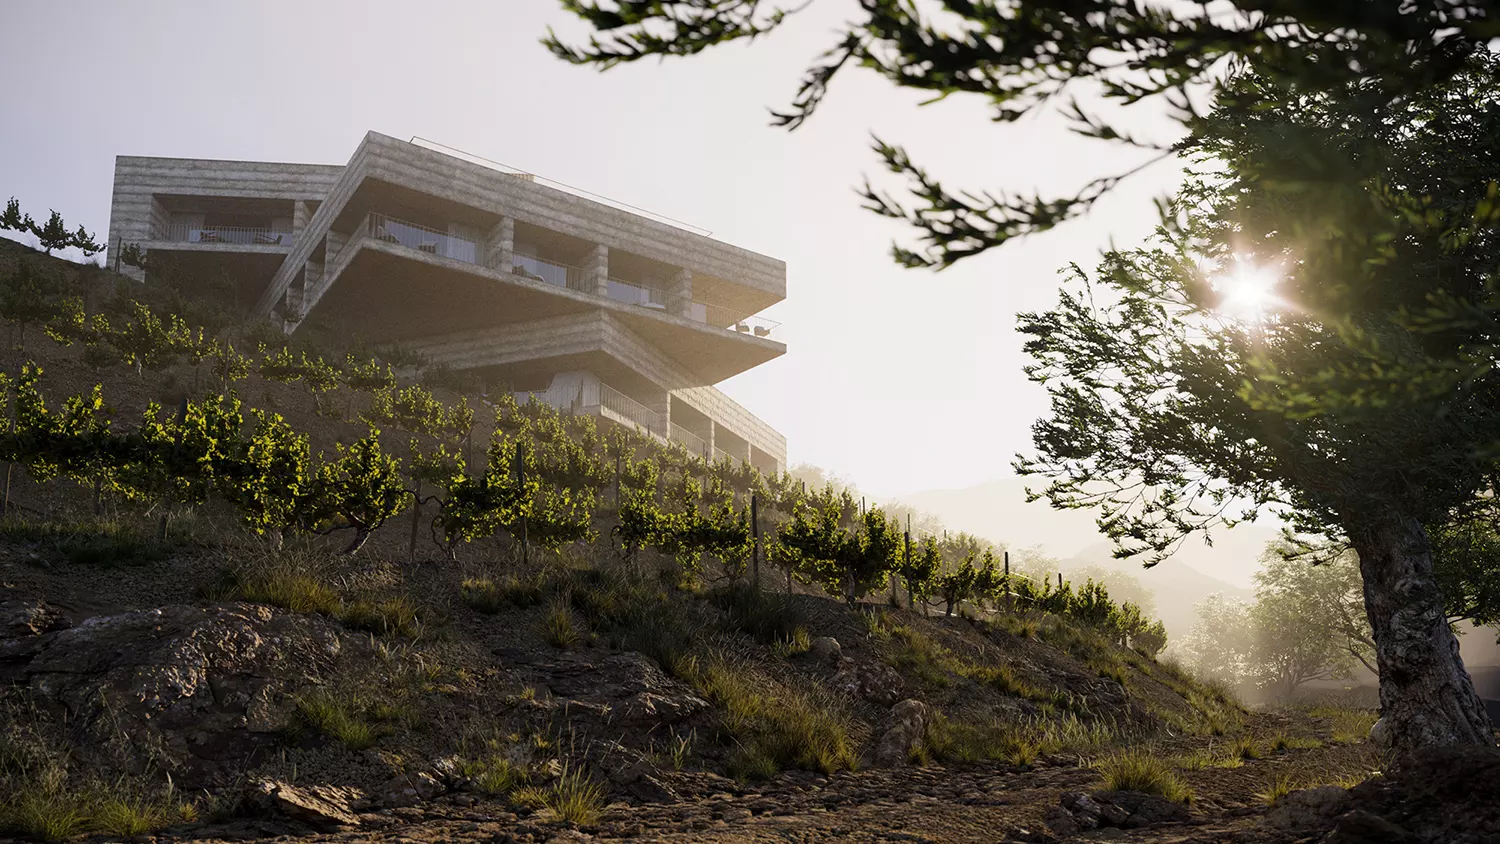 Second Winery asks the world’s finest wine estates to join the “metaverse of wine”